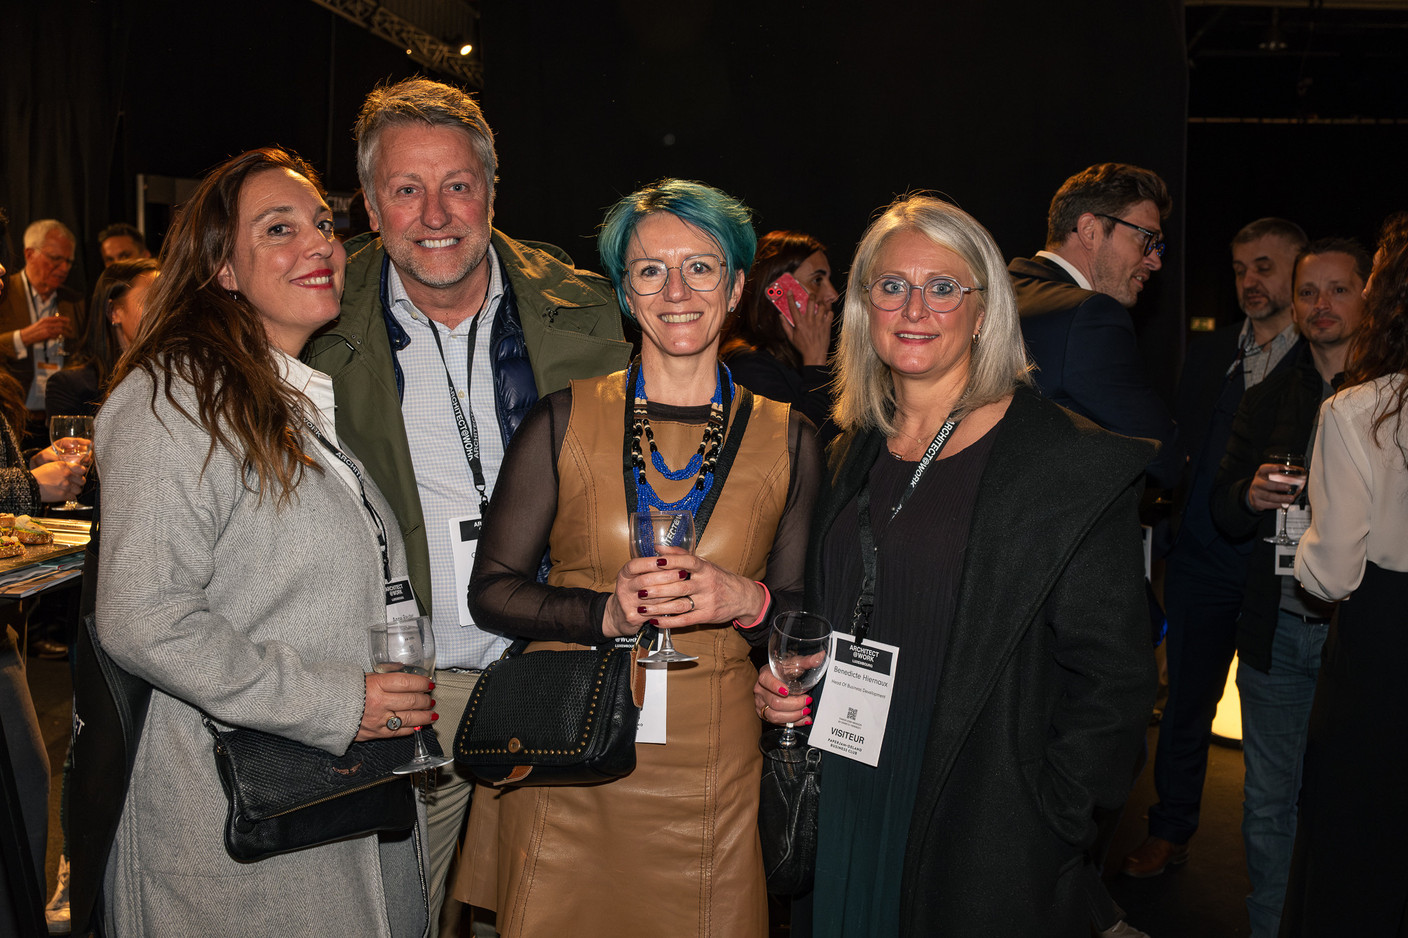 Anne Reuter (New Immo), Olivier Martin (New Immo), Virginie Ducommun (Campus Contern) and Benedicte Hiernaux (IoMe Luxembourg). Photo: Laurent Sturm